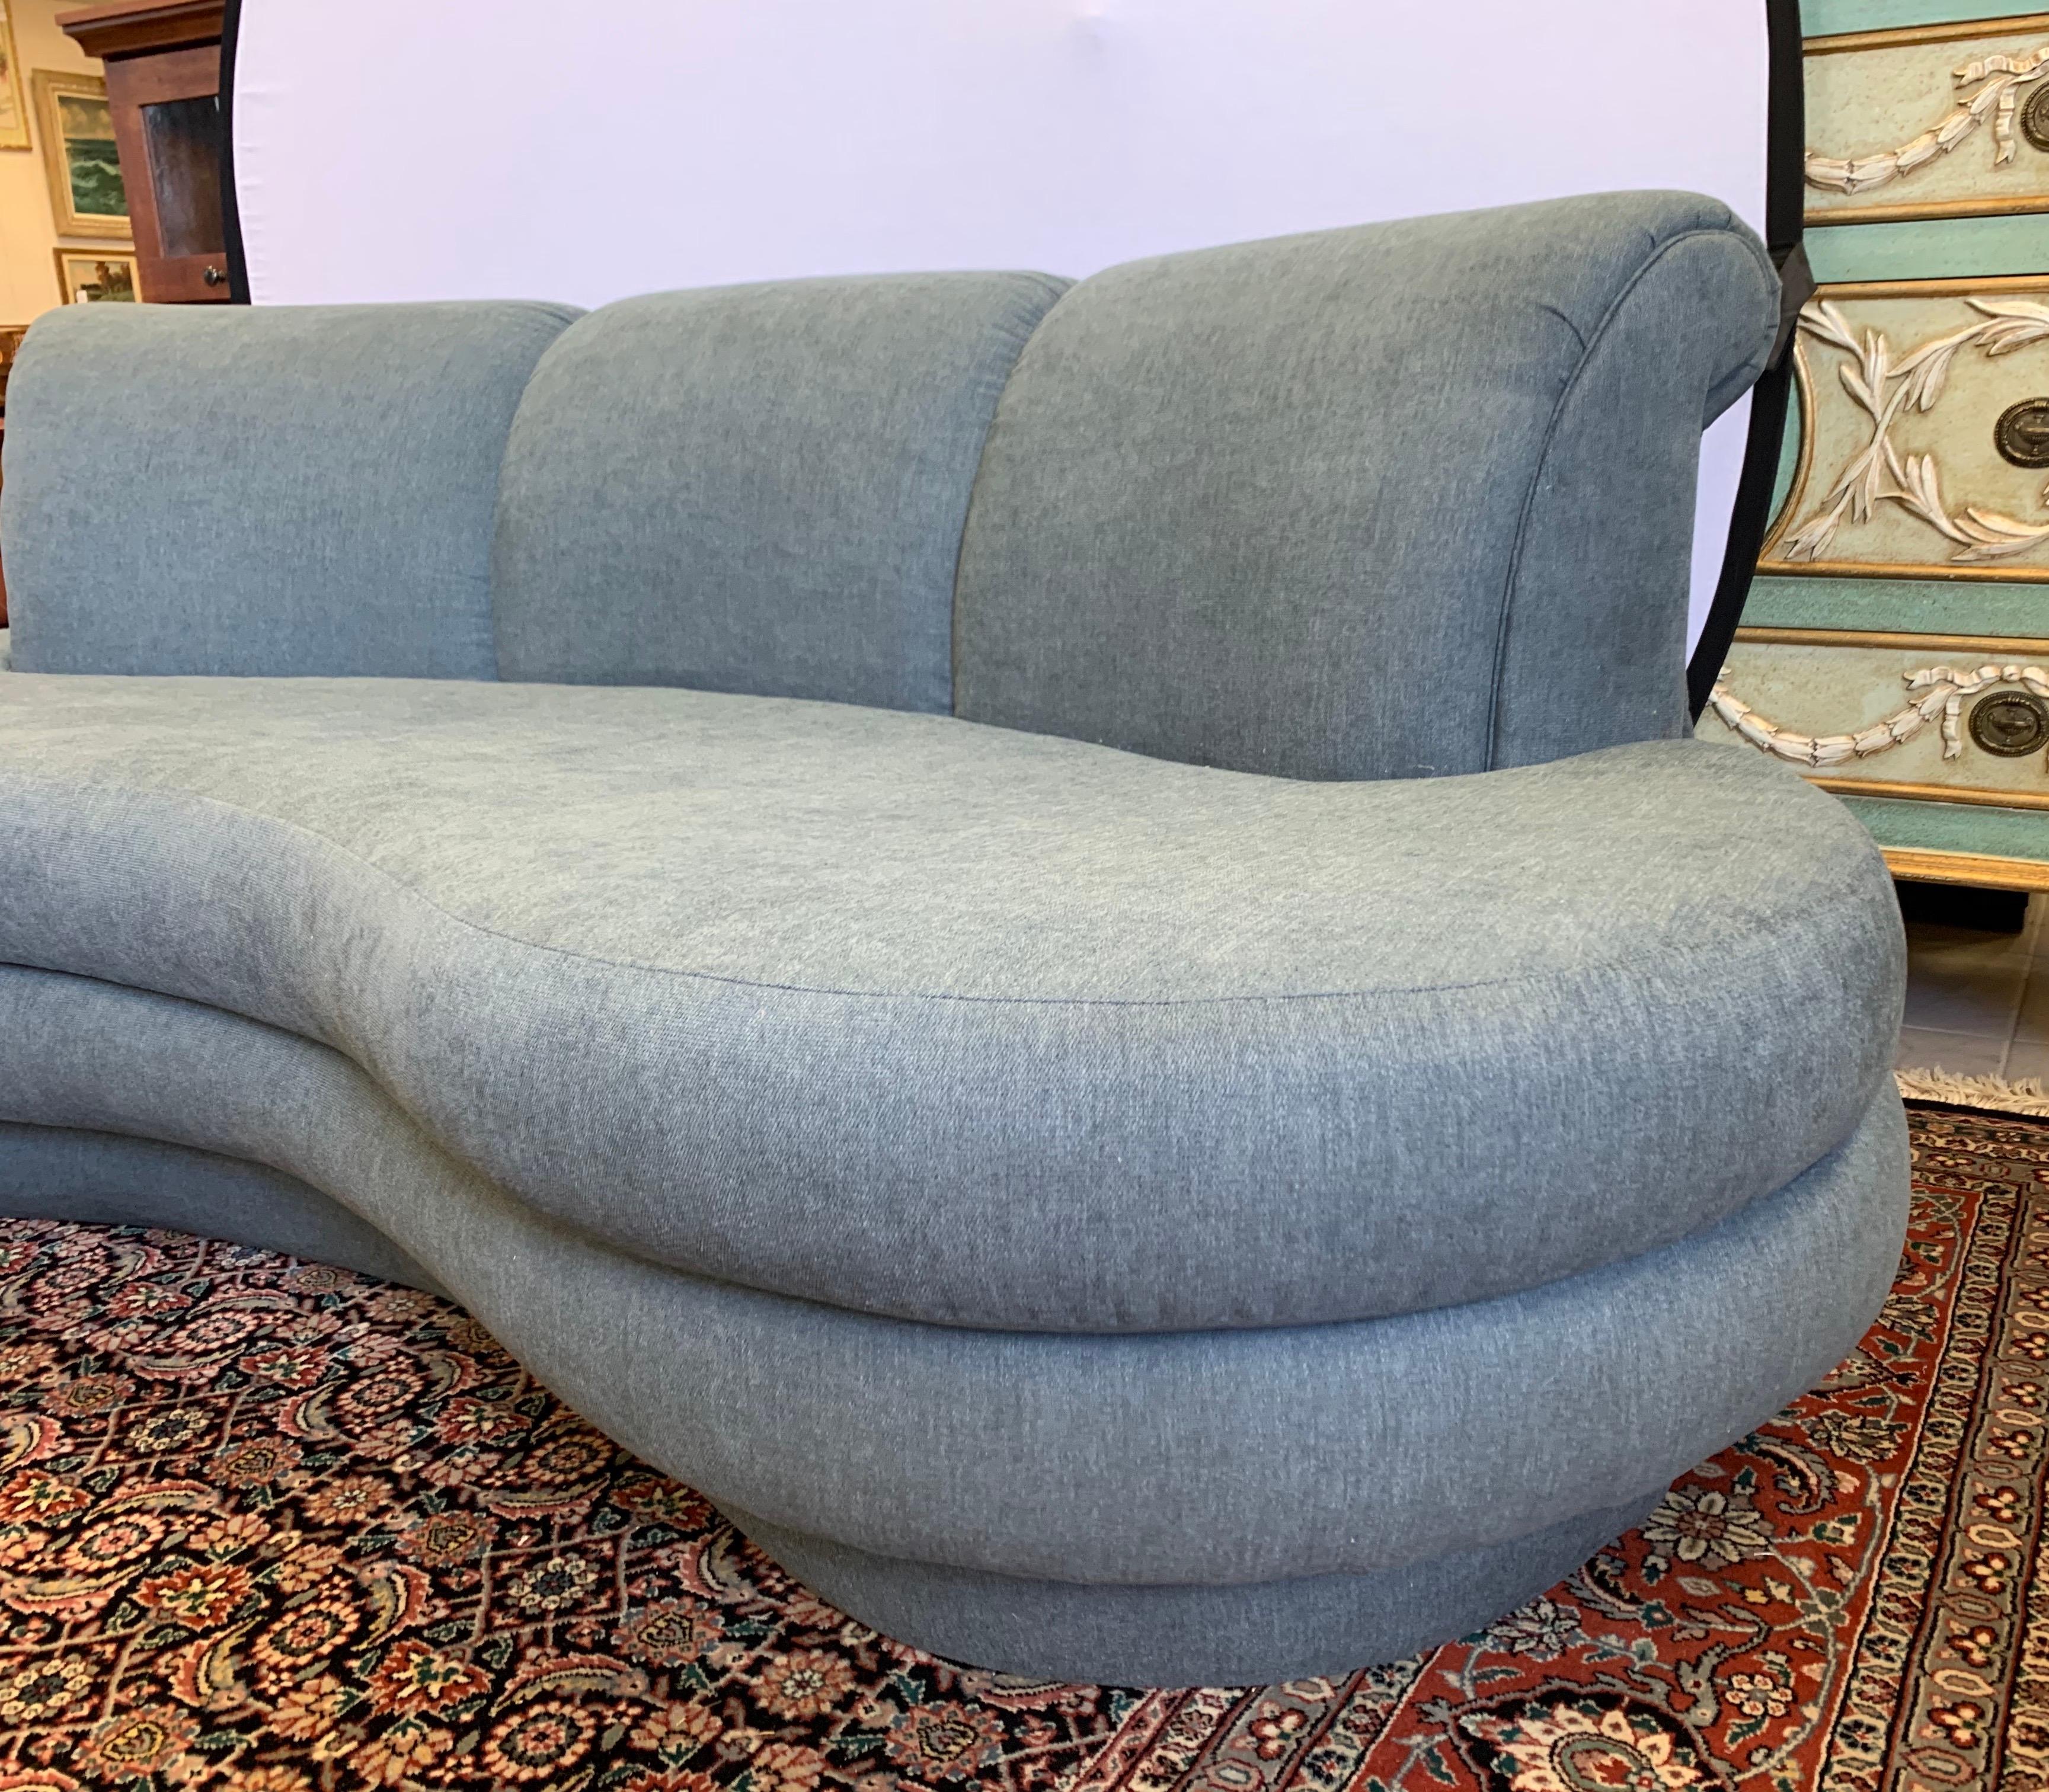 Late 20th Century Adrian Pearsall Cloud Sofa for Comfort Designs Newly Upholstered in Slate Gray 